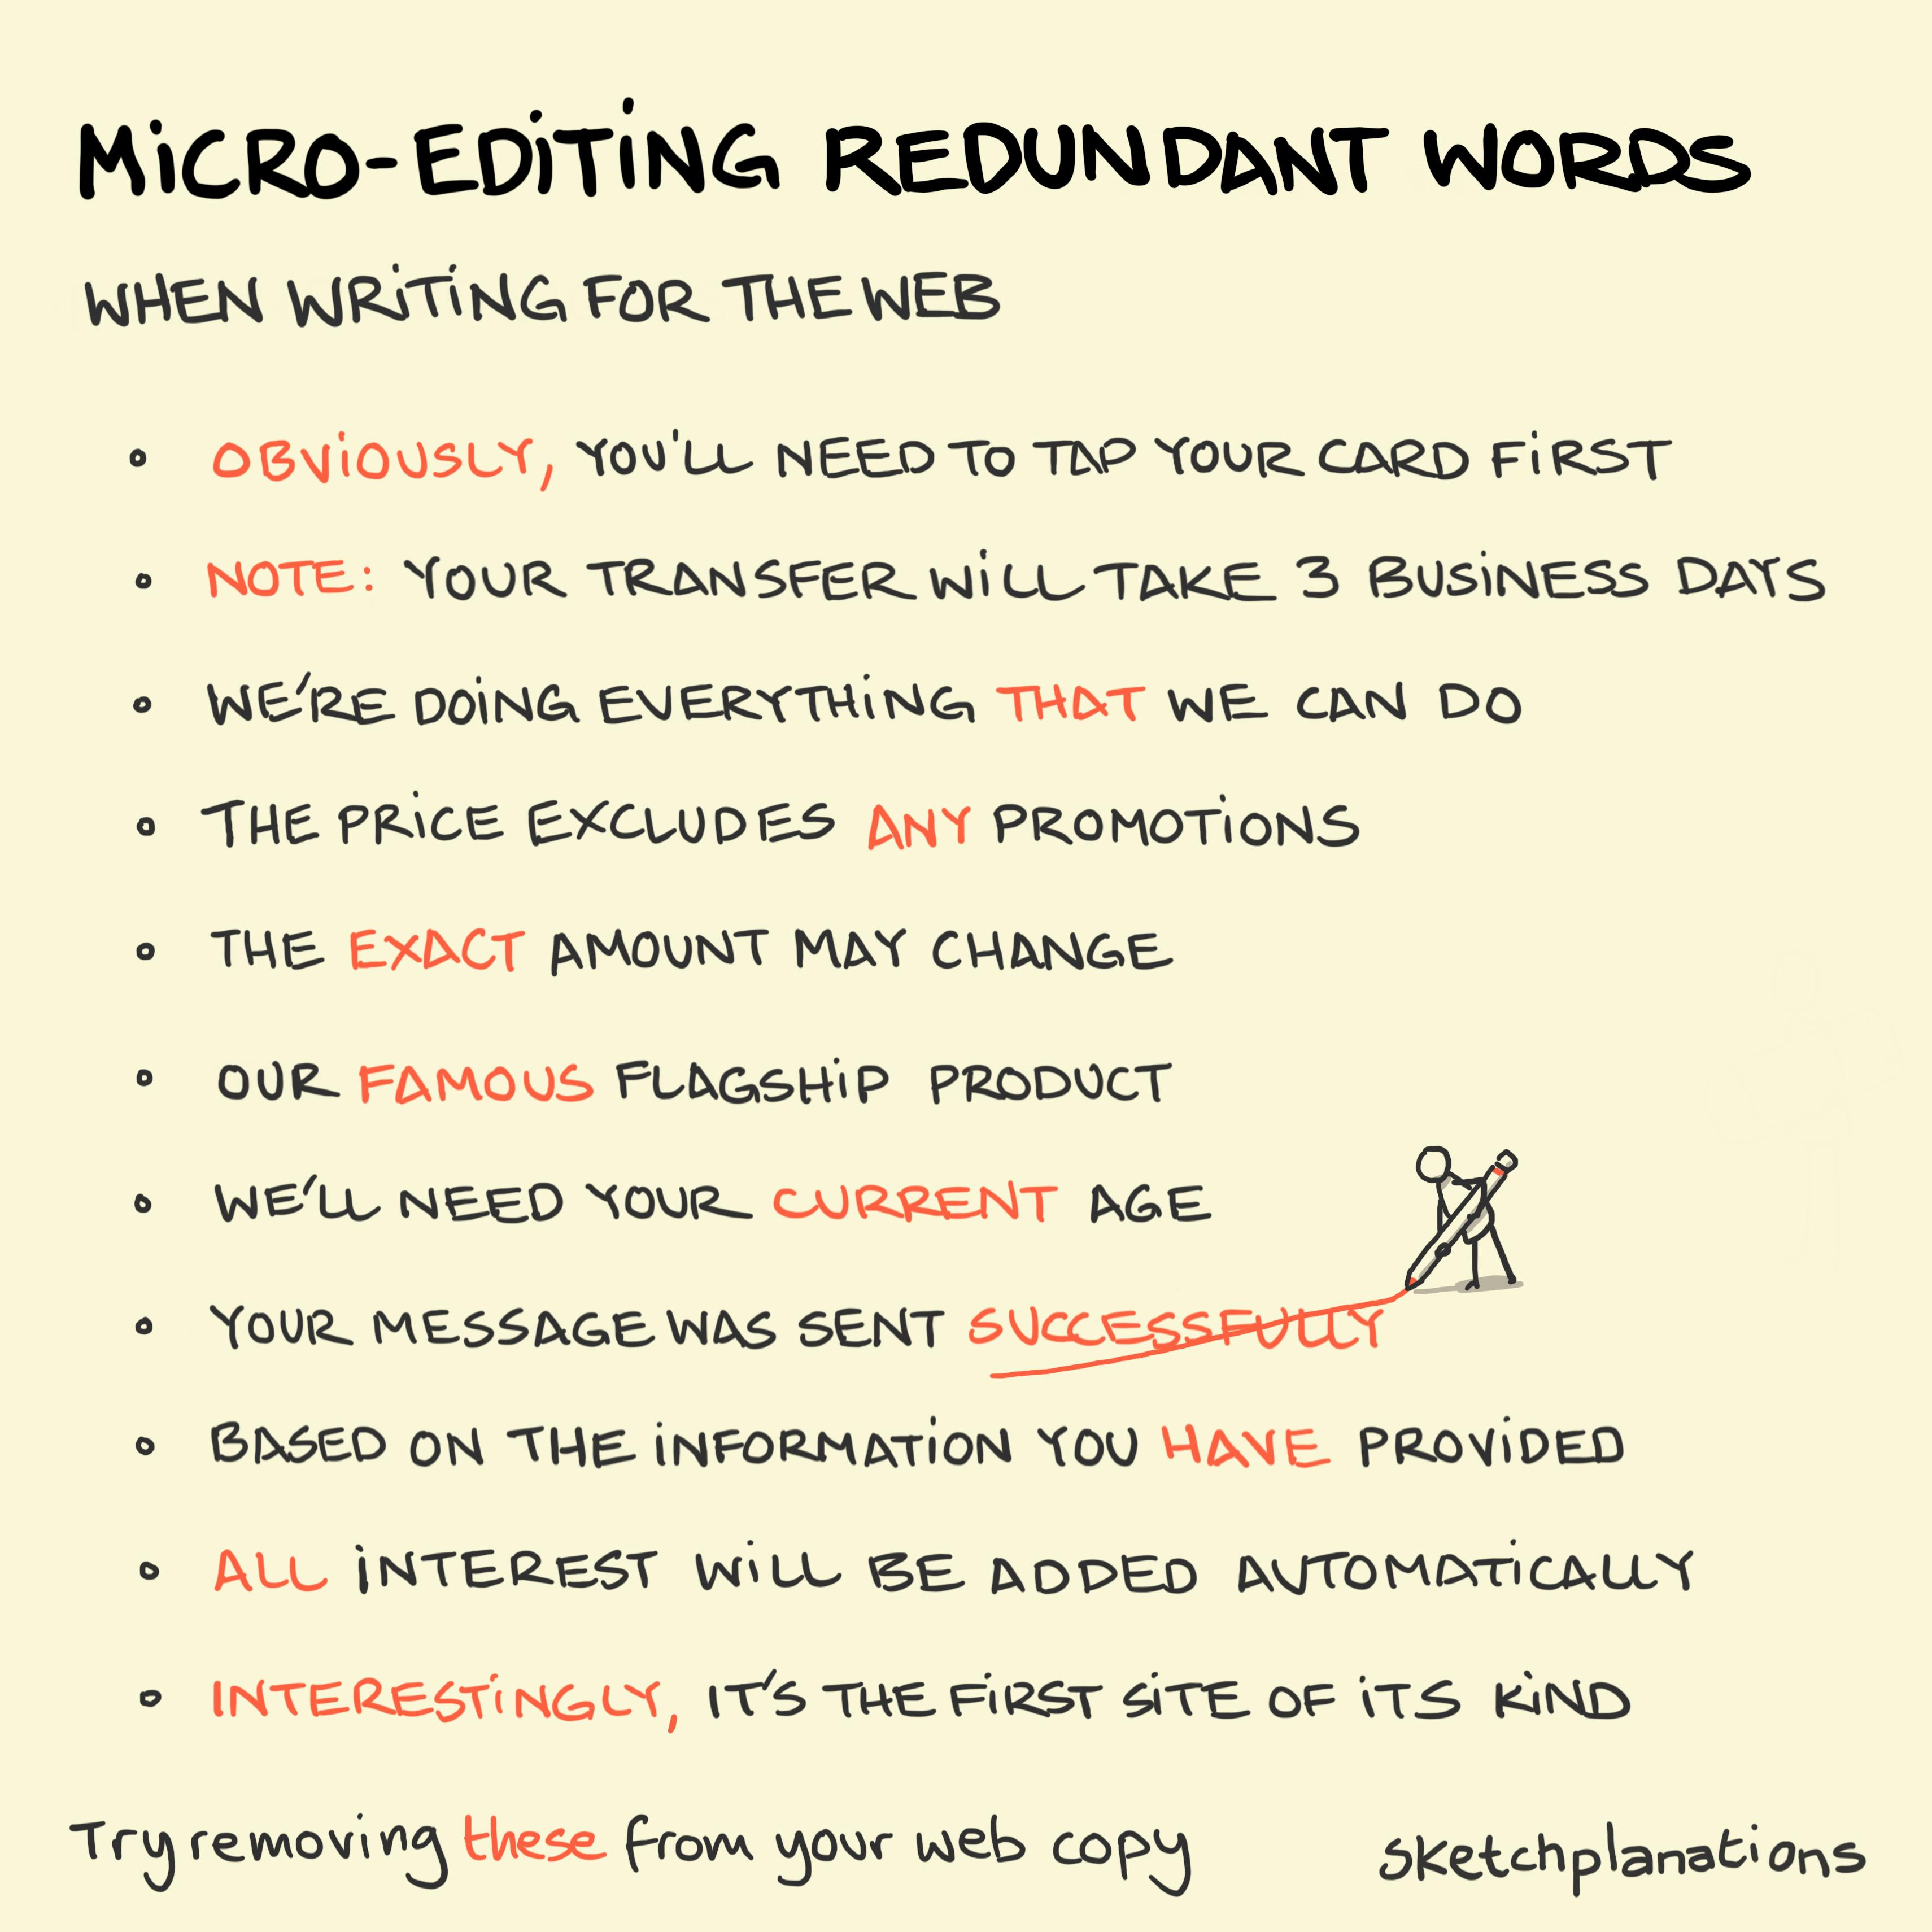 Examples of Cliches and Redundancies to Avoid in Your Writing